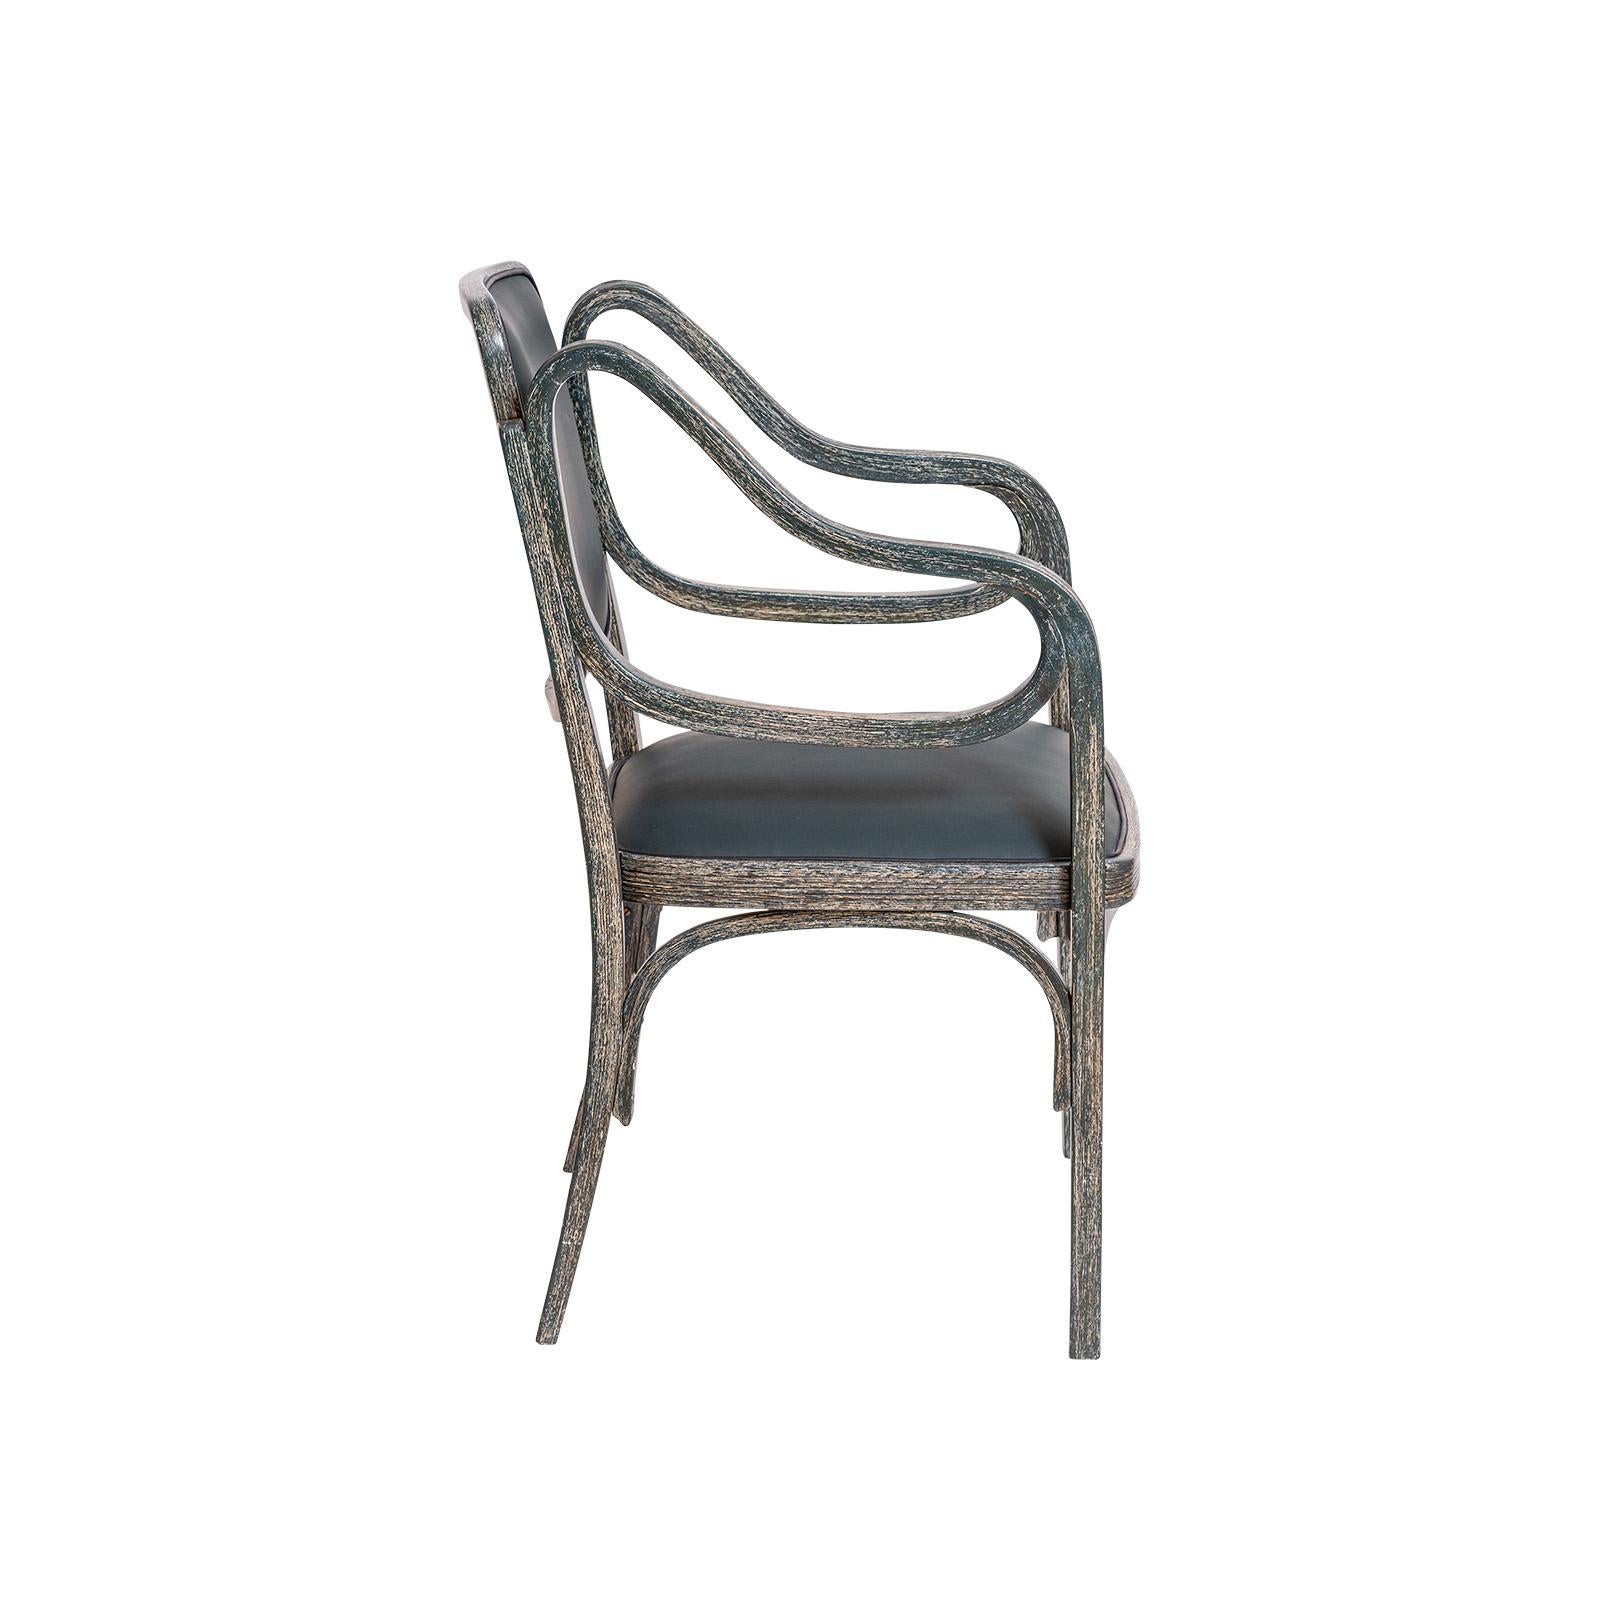 As pioneer and master of the Modern, Otto Wagner seized the then rather new technique of bending Wood for his furniture designs.
The design of this armchair dated back in 1901. This particular chair was manufactured at Mundus circa 1906. Especially